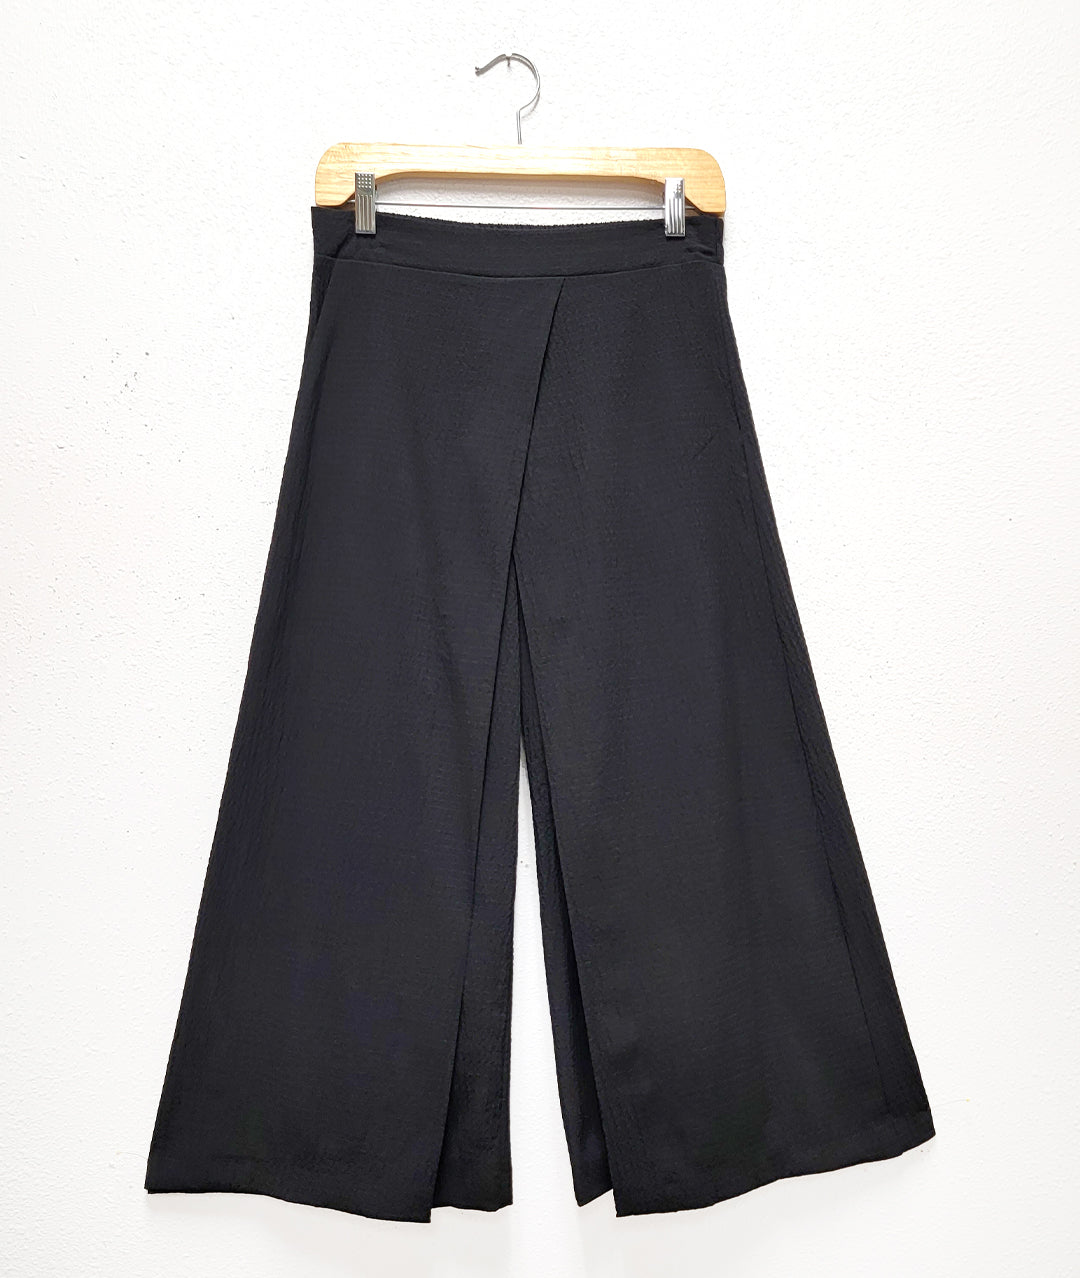 wide leg black pant with an overlay layer on each leg.